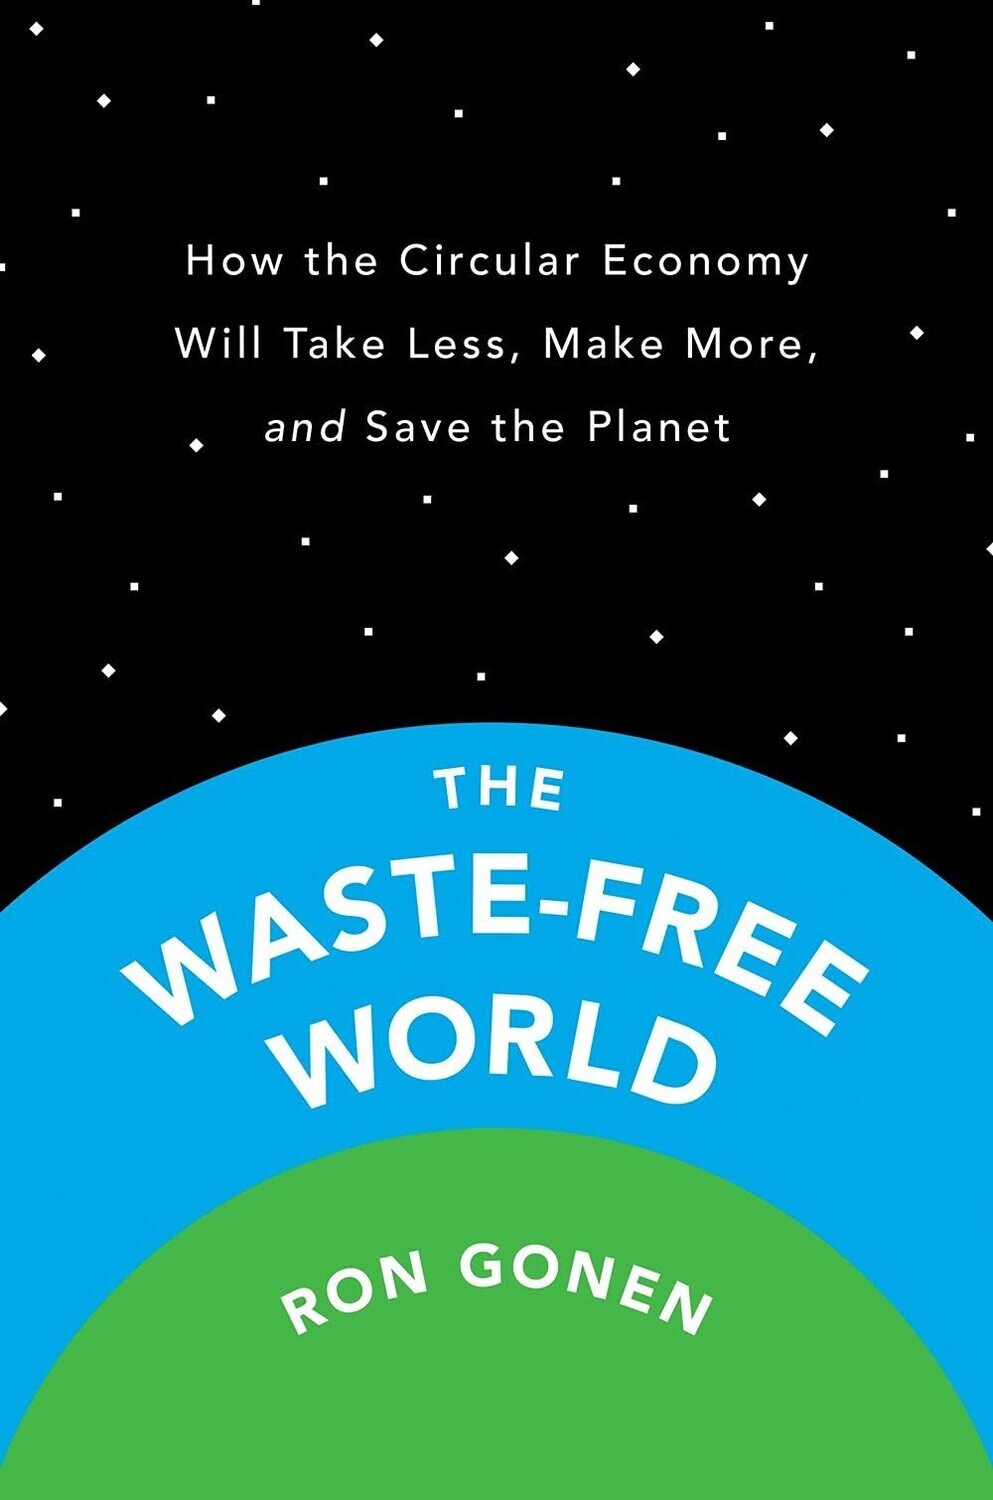 Book - The Waste-Free World: How the Circular Economy Will Take Less, Make More, and Save the Planet